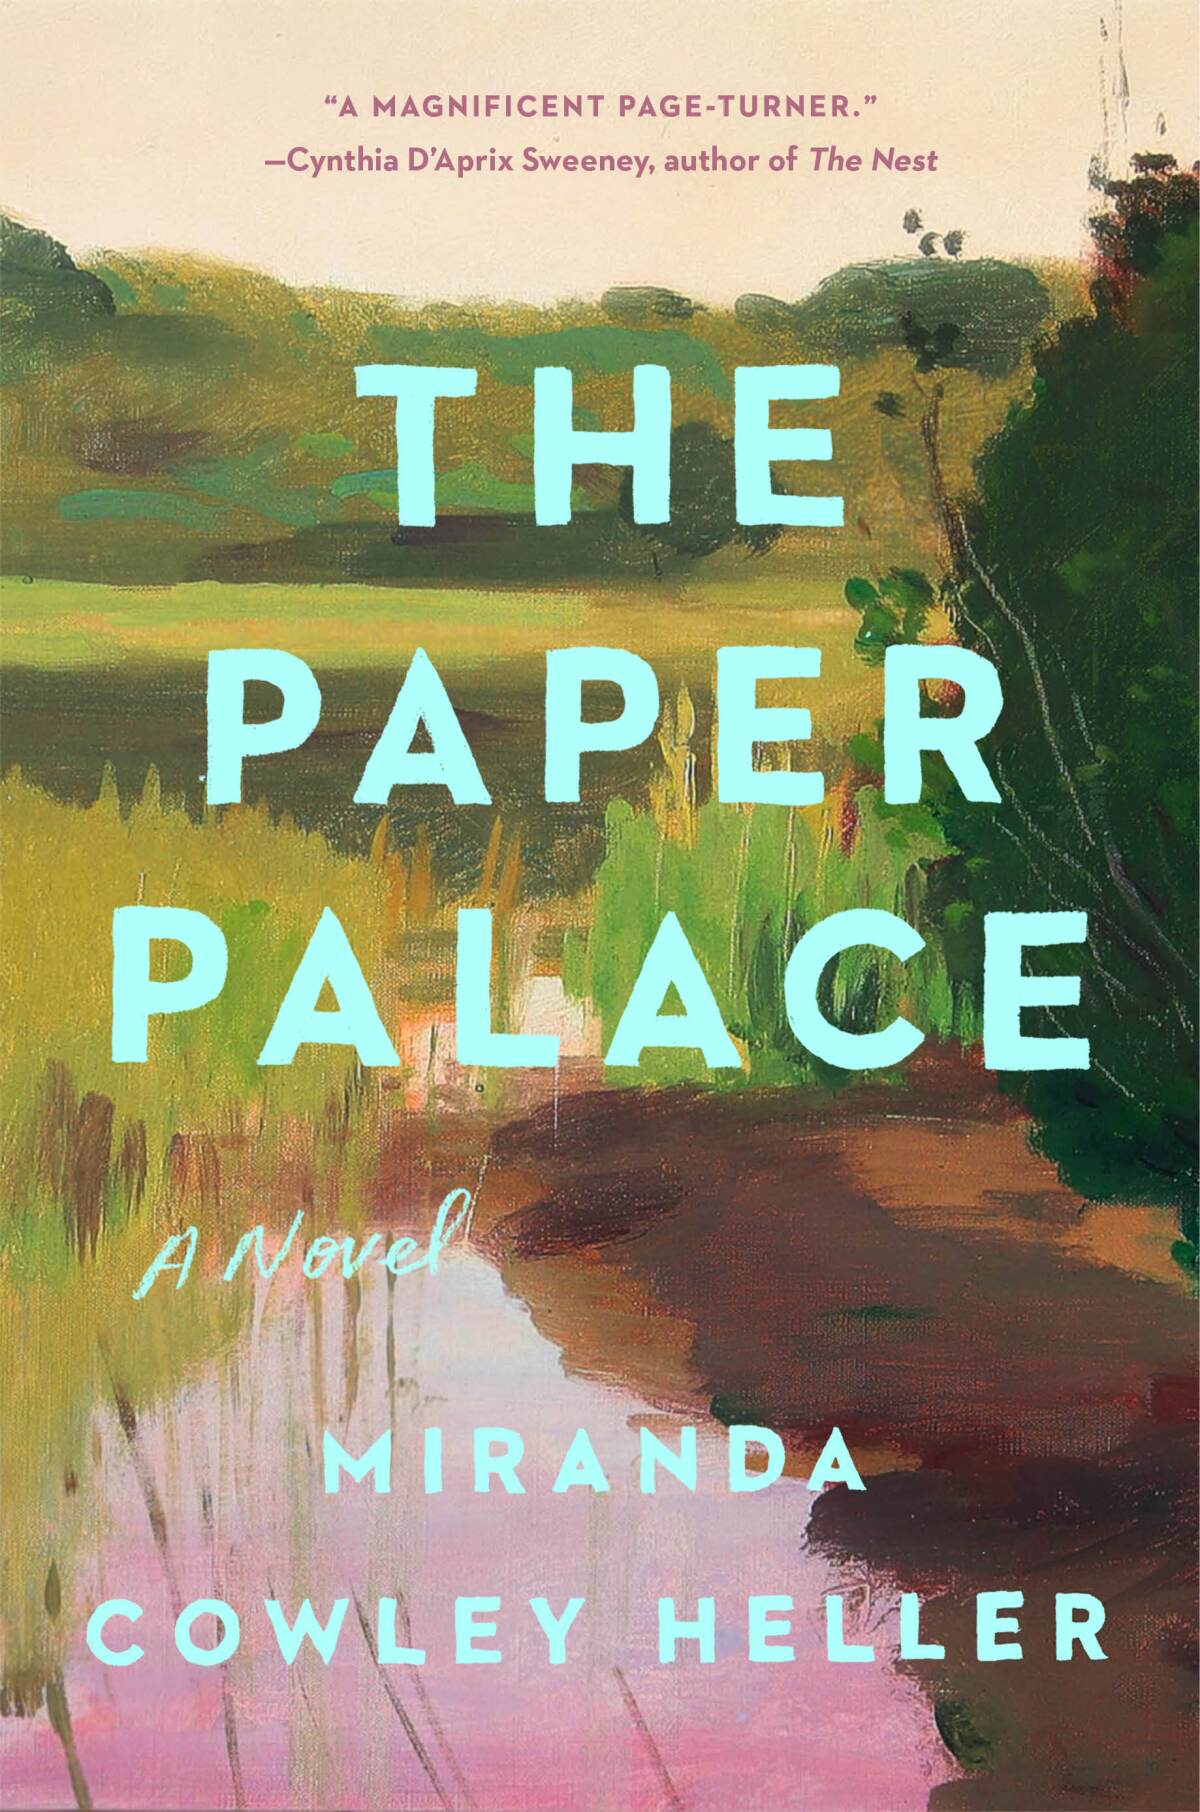 The cover of the book "The Paper Palace," by Miranda Cowley Heller